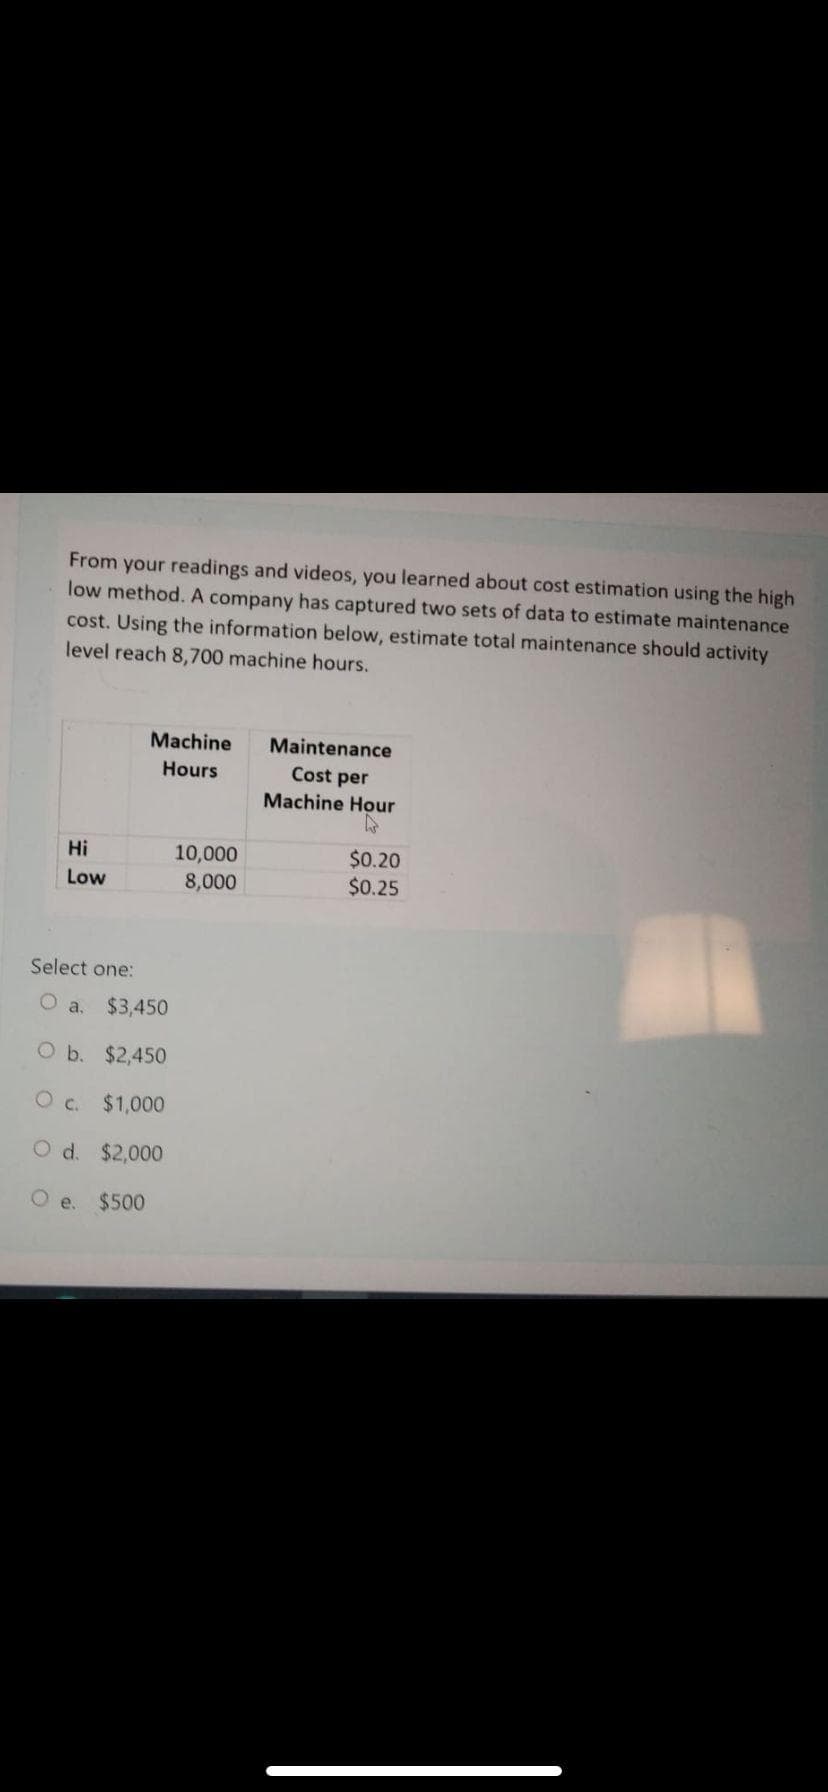 From your readings and videos, you learned about cost estimation using the high
low method. A company has captured two sets of data to estimate maintenance
cost. Using the information below, estimate total maintenance should activity
level reach 8,700 machine hours.
Machine
Maintenance
Hours
Cost per
Machine Hour
10,000
8,000
$0.20
$0.25
Hi
Low
Select one:
O a,
$3,450
O b. $2,450
O c. $1,000
O d. $2,000
O e.
$500
